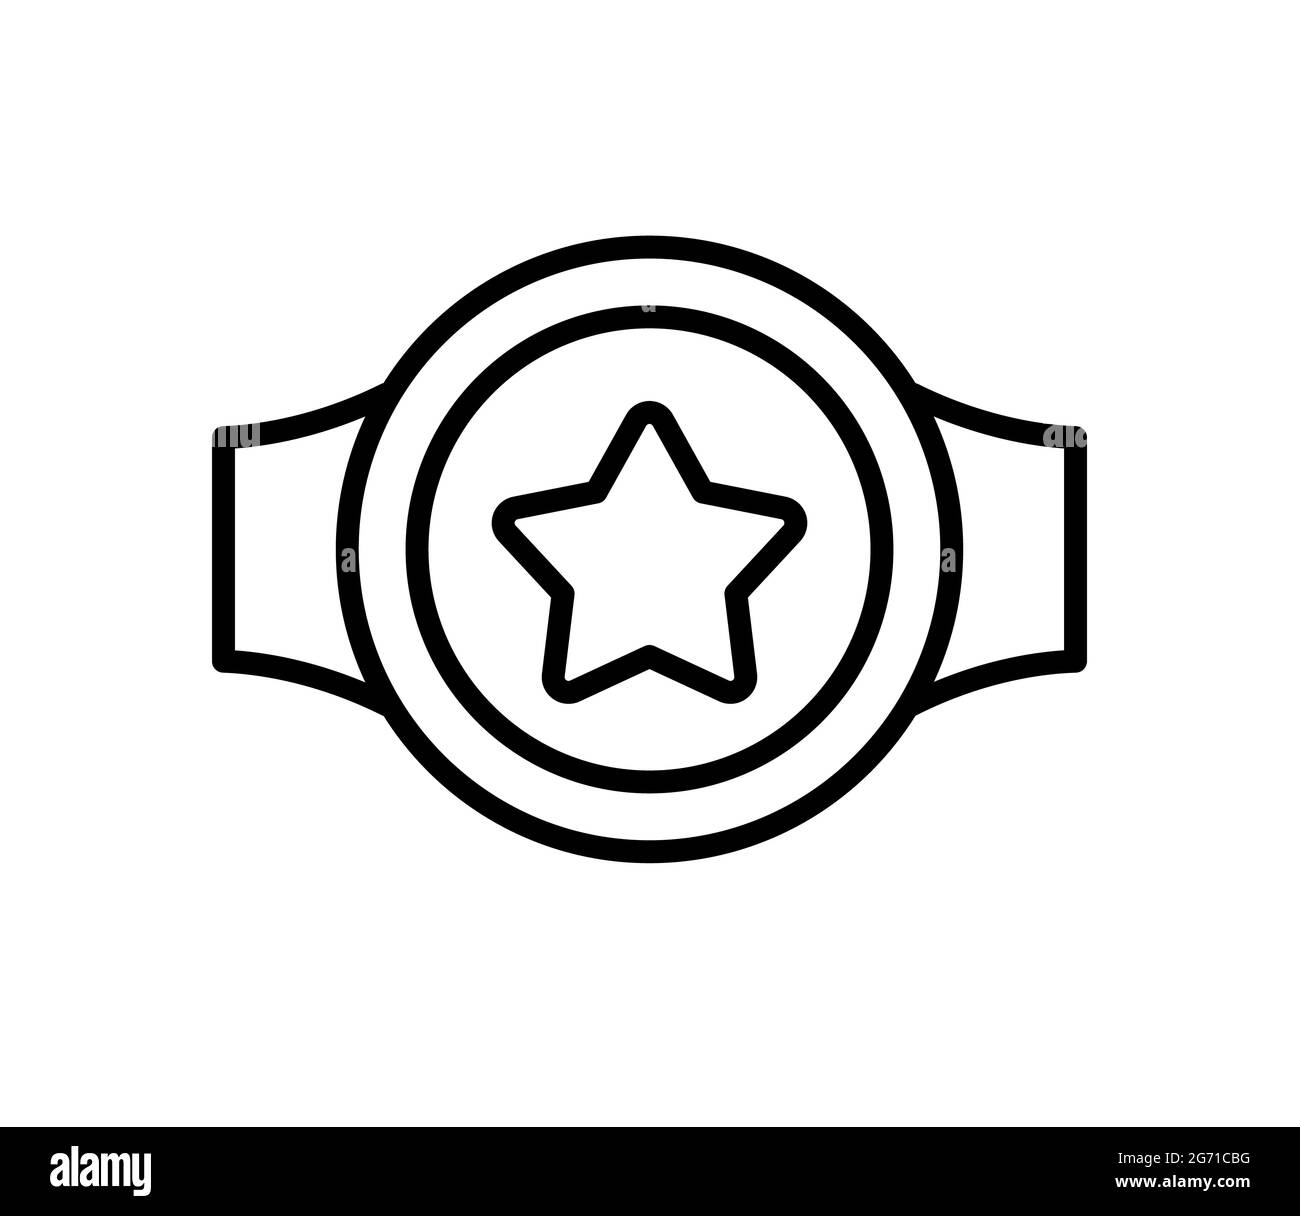 champion belt single isolated icon with outline style vector design illustration Stock Photo